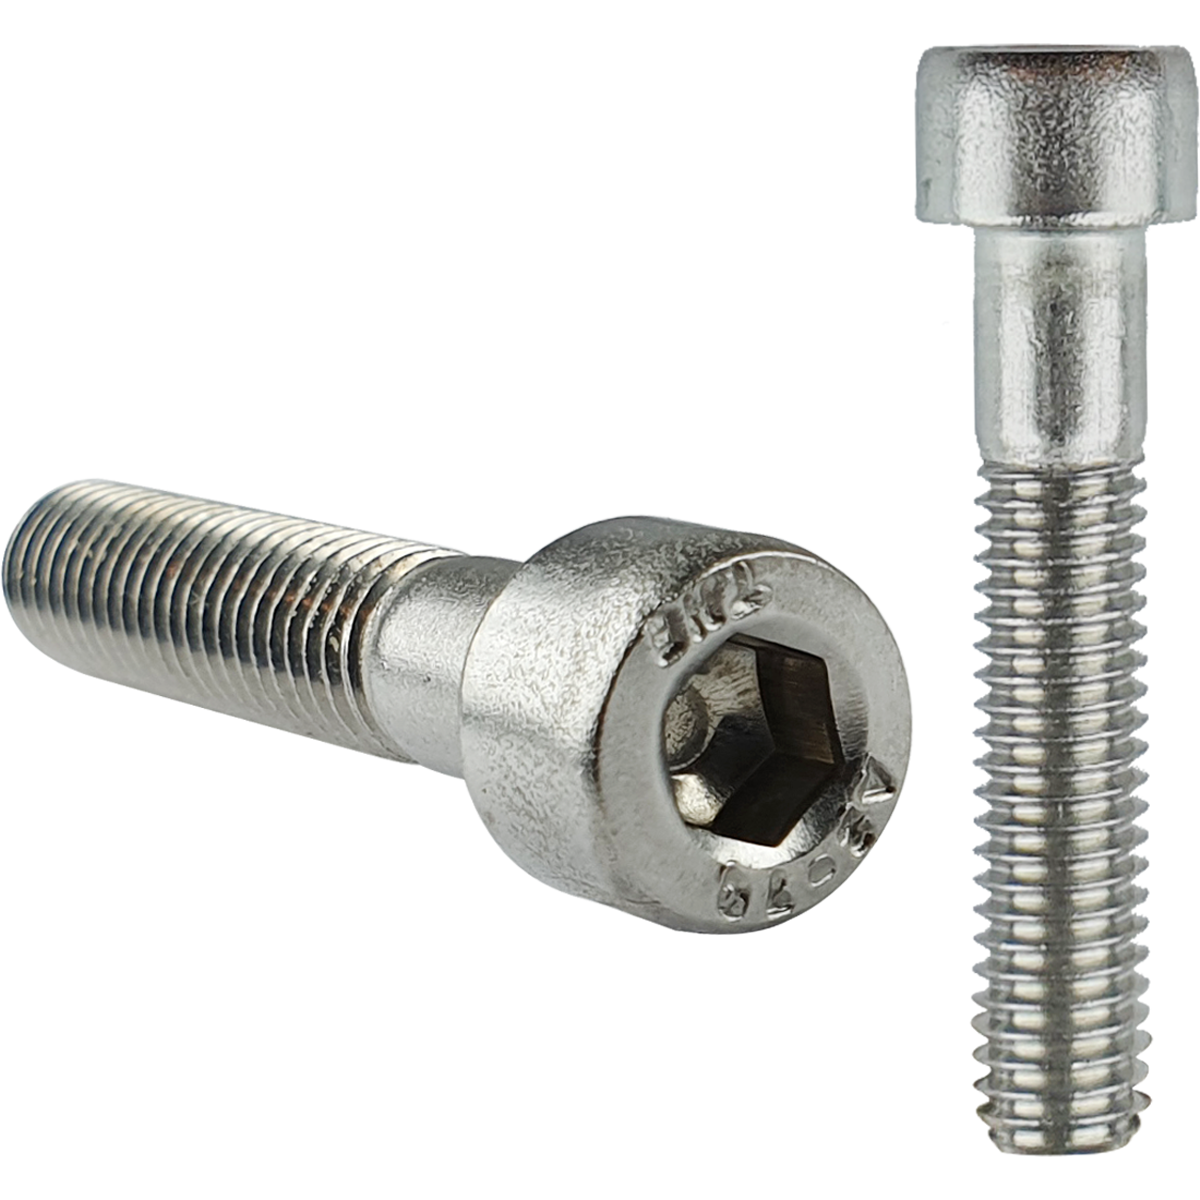 Corrosion resistant A2 stainless steel cap head screws with a unified national coarse thread (UNC) and hex socket recess